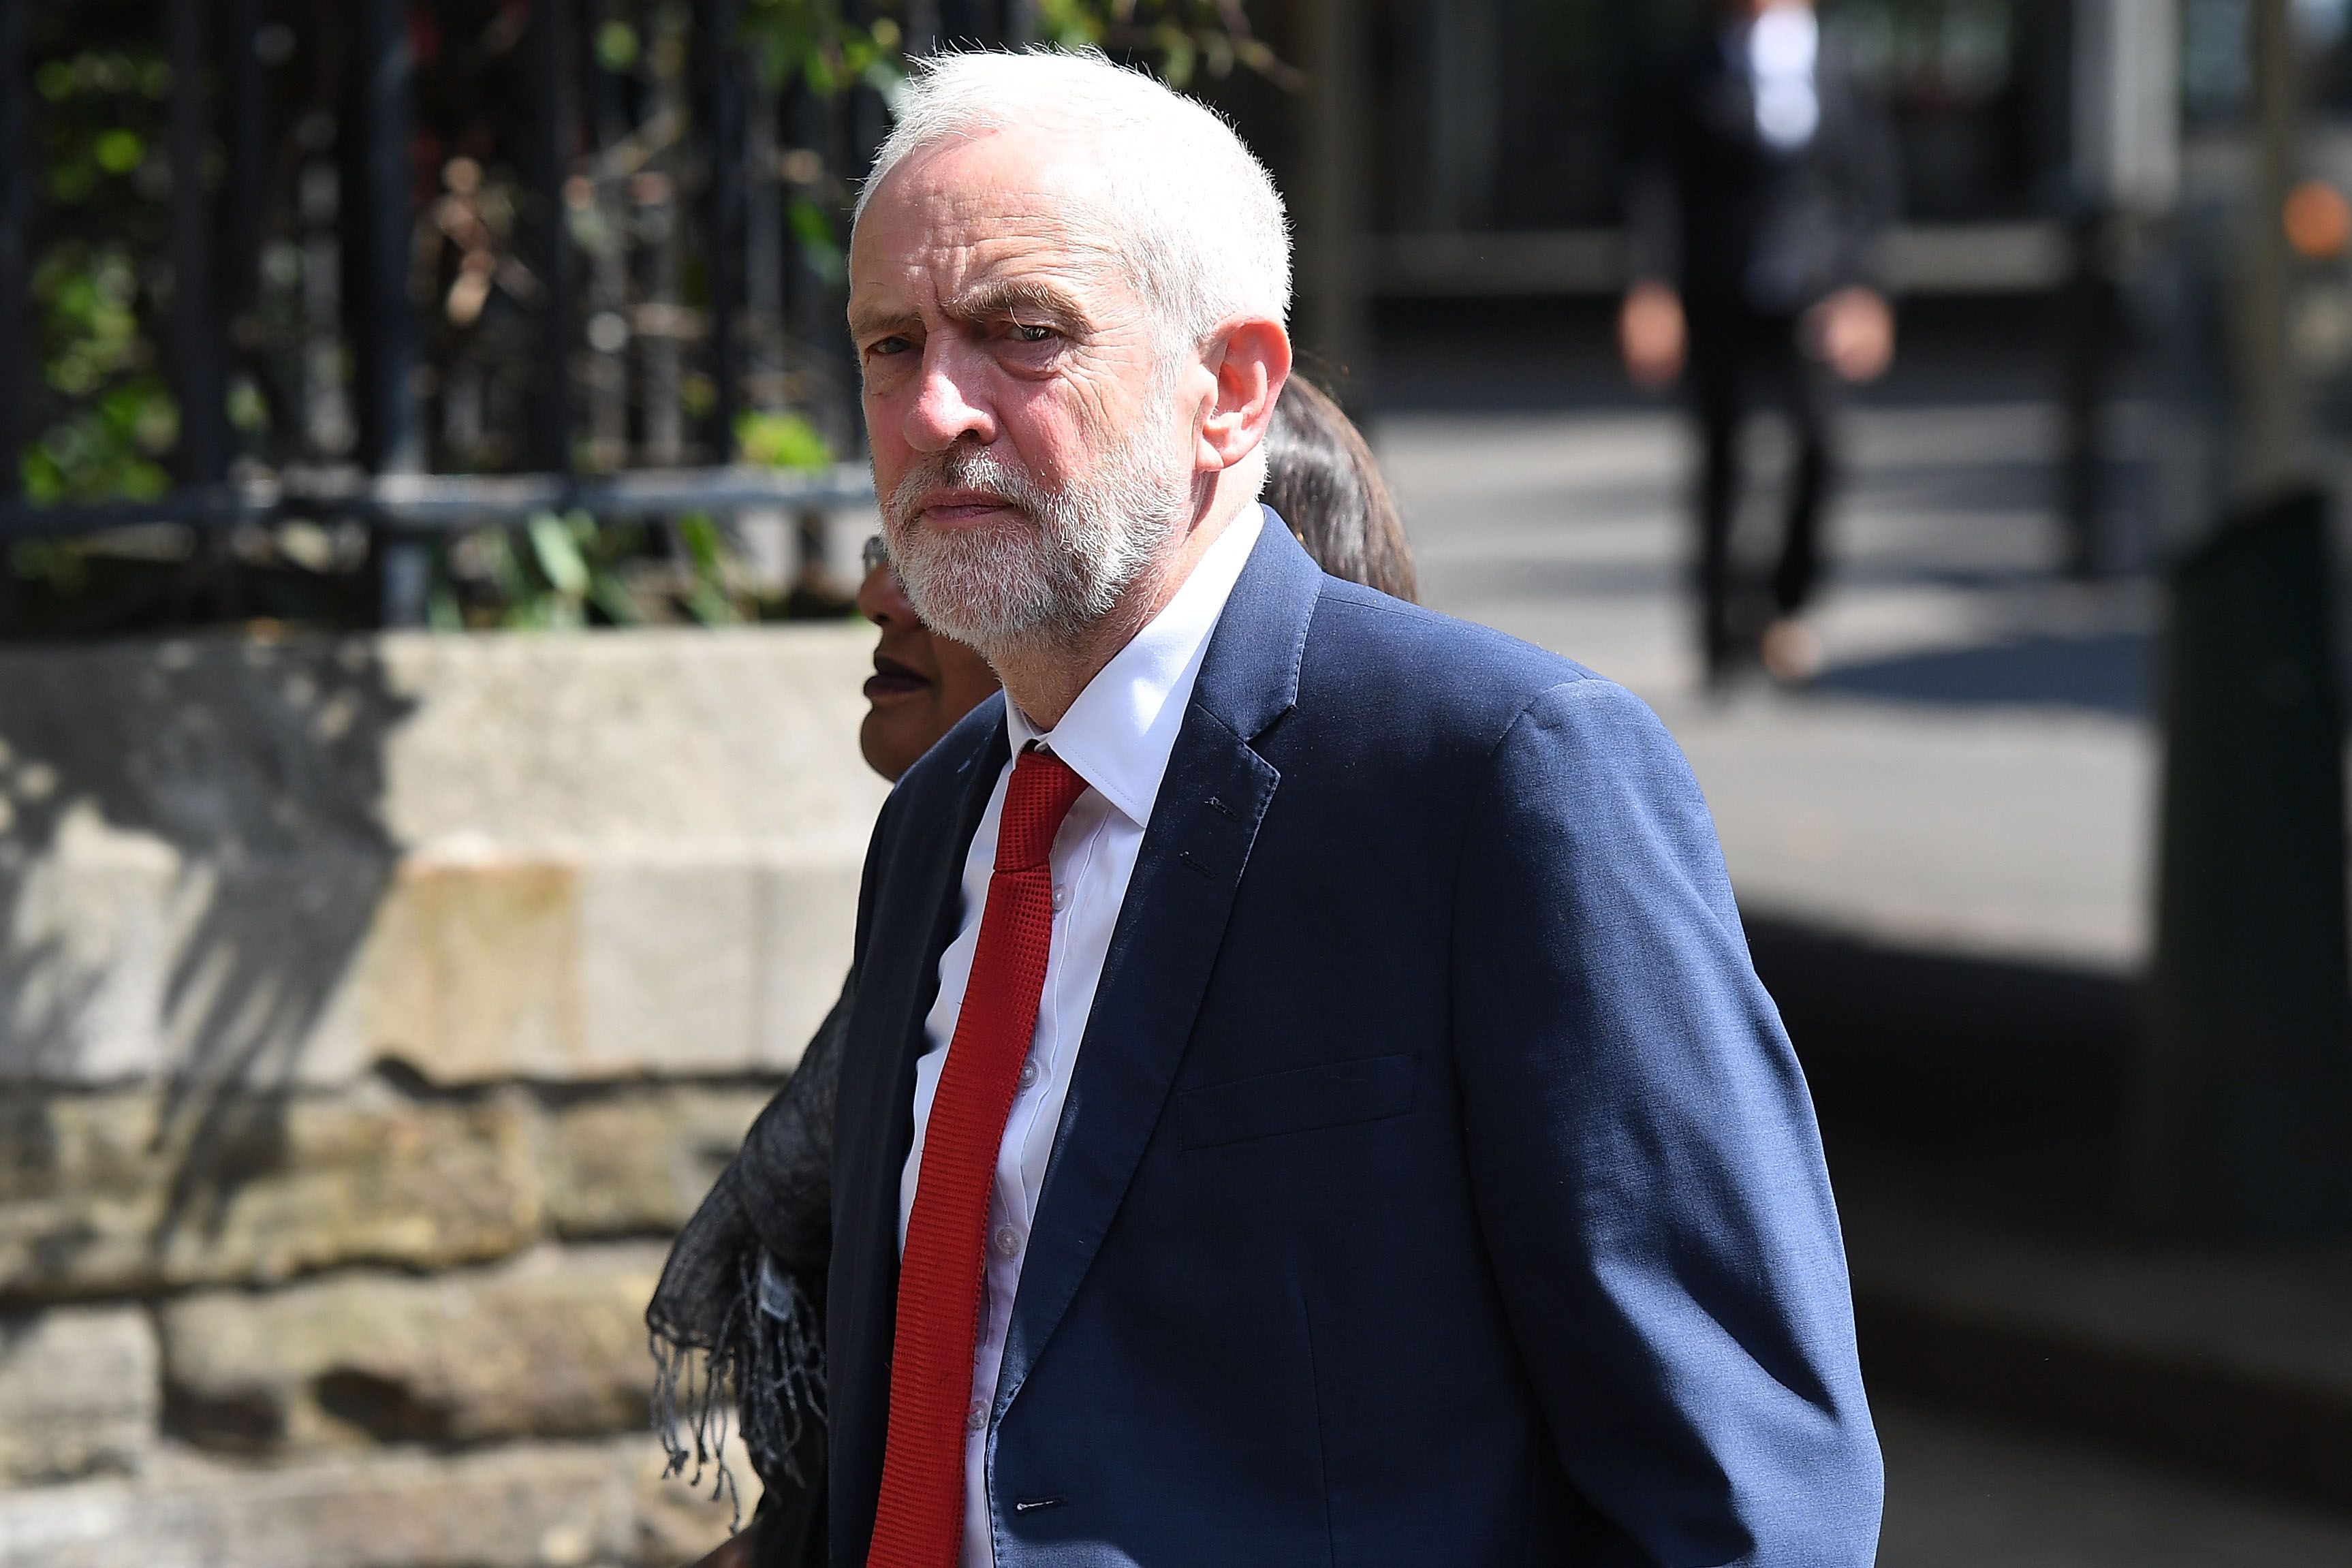 LONDON, ENGLAND - JUNE 03: Leader of the Labour Party, Jeremy Corbyn arrives at Southwark Cathedral to attend the first anniversary of the London Bridge terror attack on June 3, 2018 in London, England. The anniversary will be marked by a service at Southwark Cathedral to honour the emergency services' response to last year's attack on 3 June, followed by a short procession from the cathedral to Southwark Needle, at the corner of London Bridge, ending with a minute's silence at 4.30pm. (Photo by Chris J Ratcliffe/Getty Images)